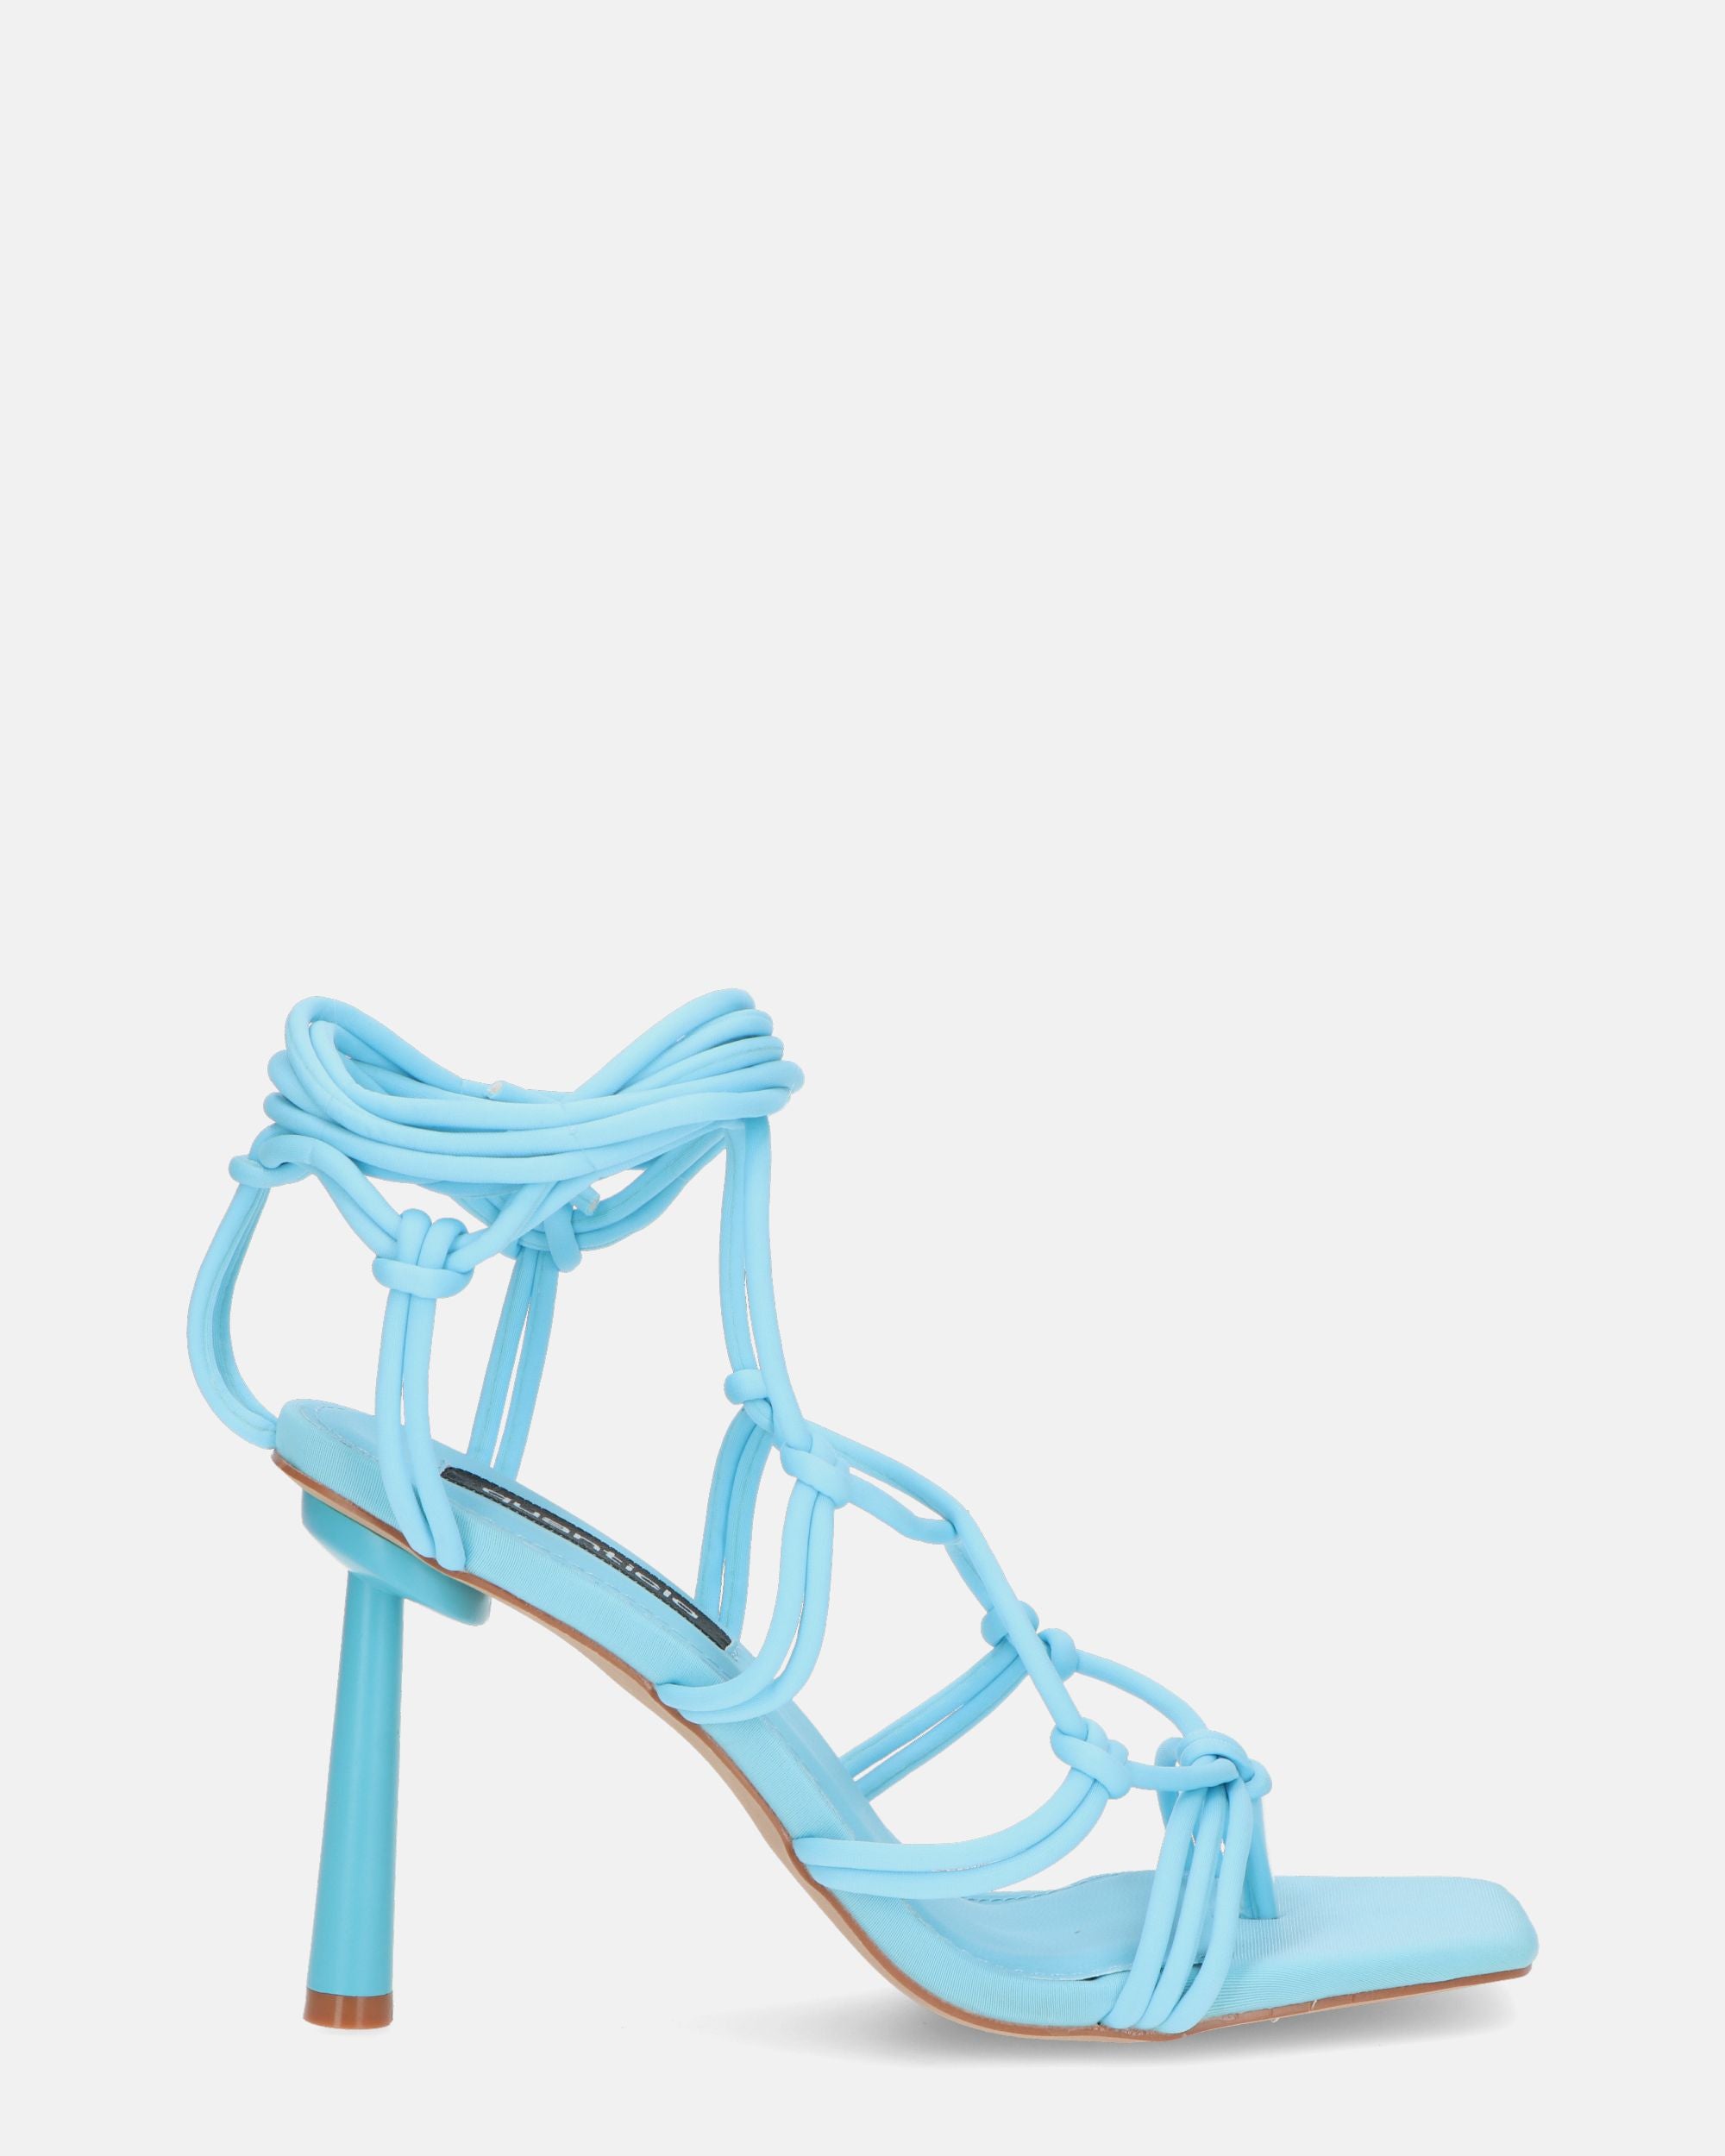 SAMOA - blue lycra sandals with high heel and laces